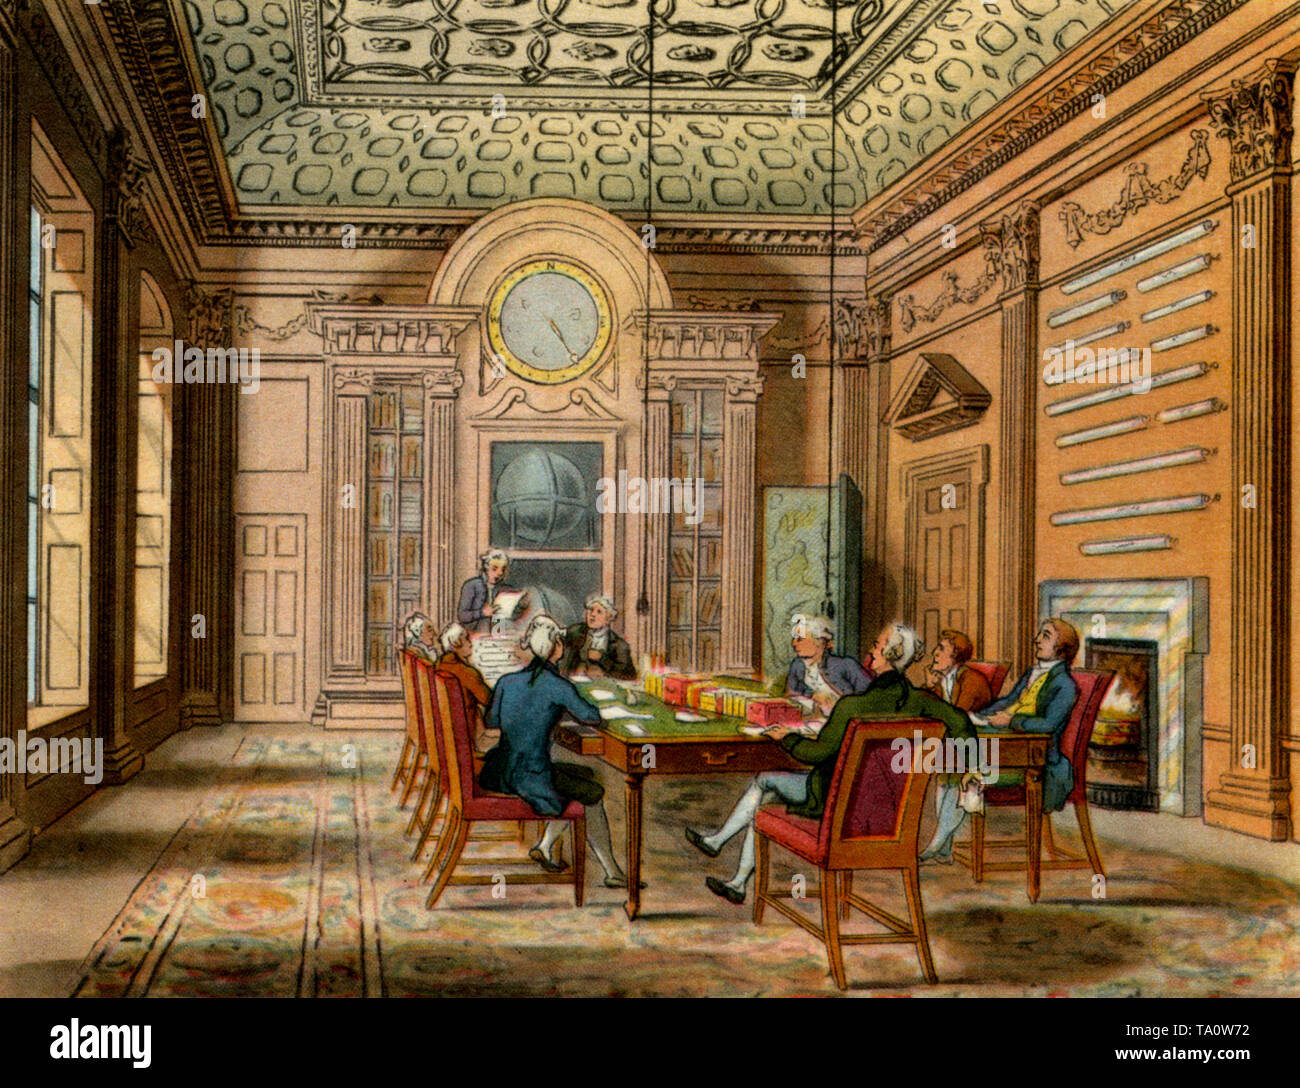 The Board Room of the Admiralty, c1808-1810. A print from 'The Microcosm of London', by William Henry Pyne (1770-1843). Artists: Thomas Rowlandson (1756-1827) and Auguste Charles Pugin (1762-1832). The Admiralty Board Room is part of a complex of buildings sometimes know as the Old Admiralty, which were completed in 1726. It was the first purpose built office building in Britain and was partly designed by Robert Adam (1728-1792). Stock Photo